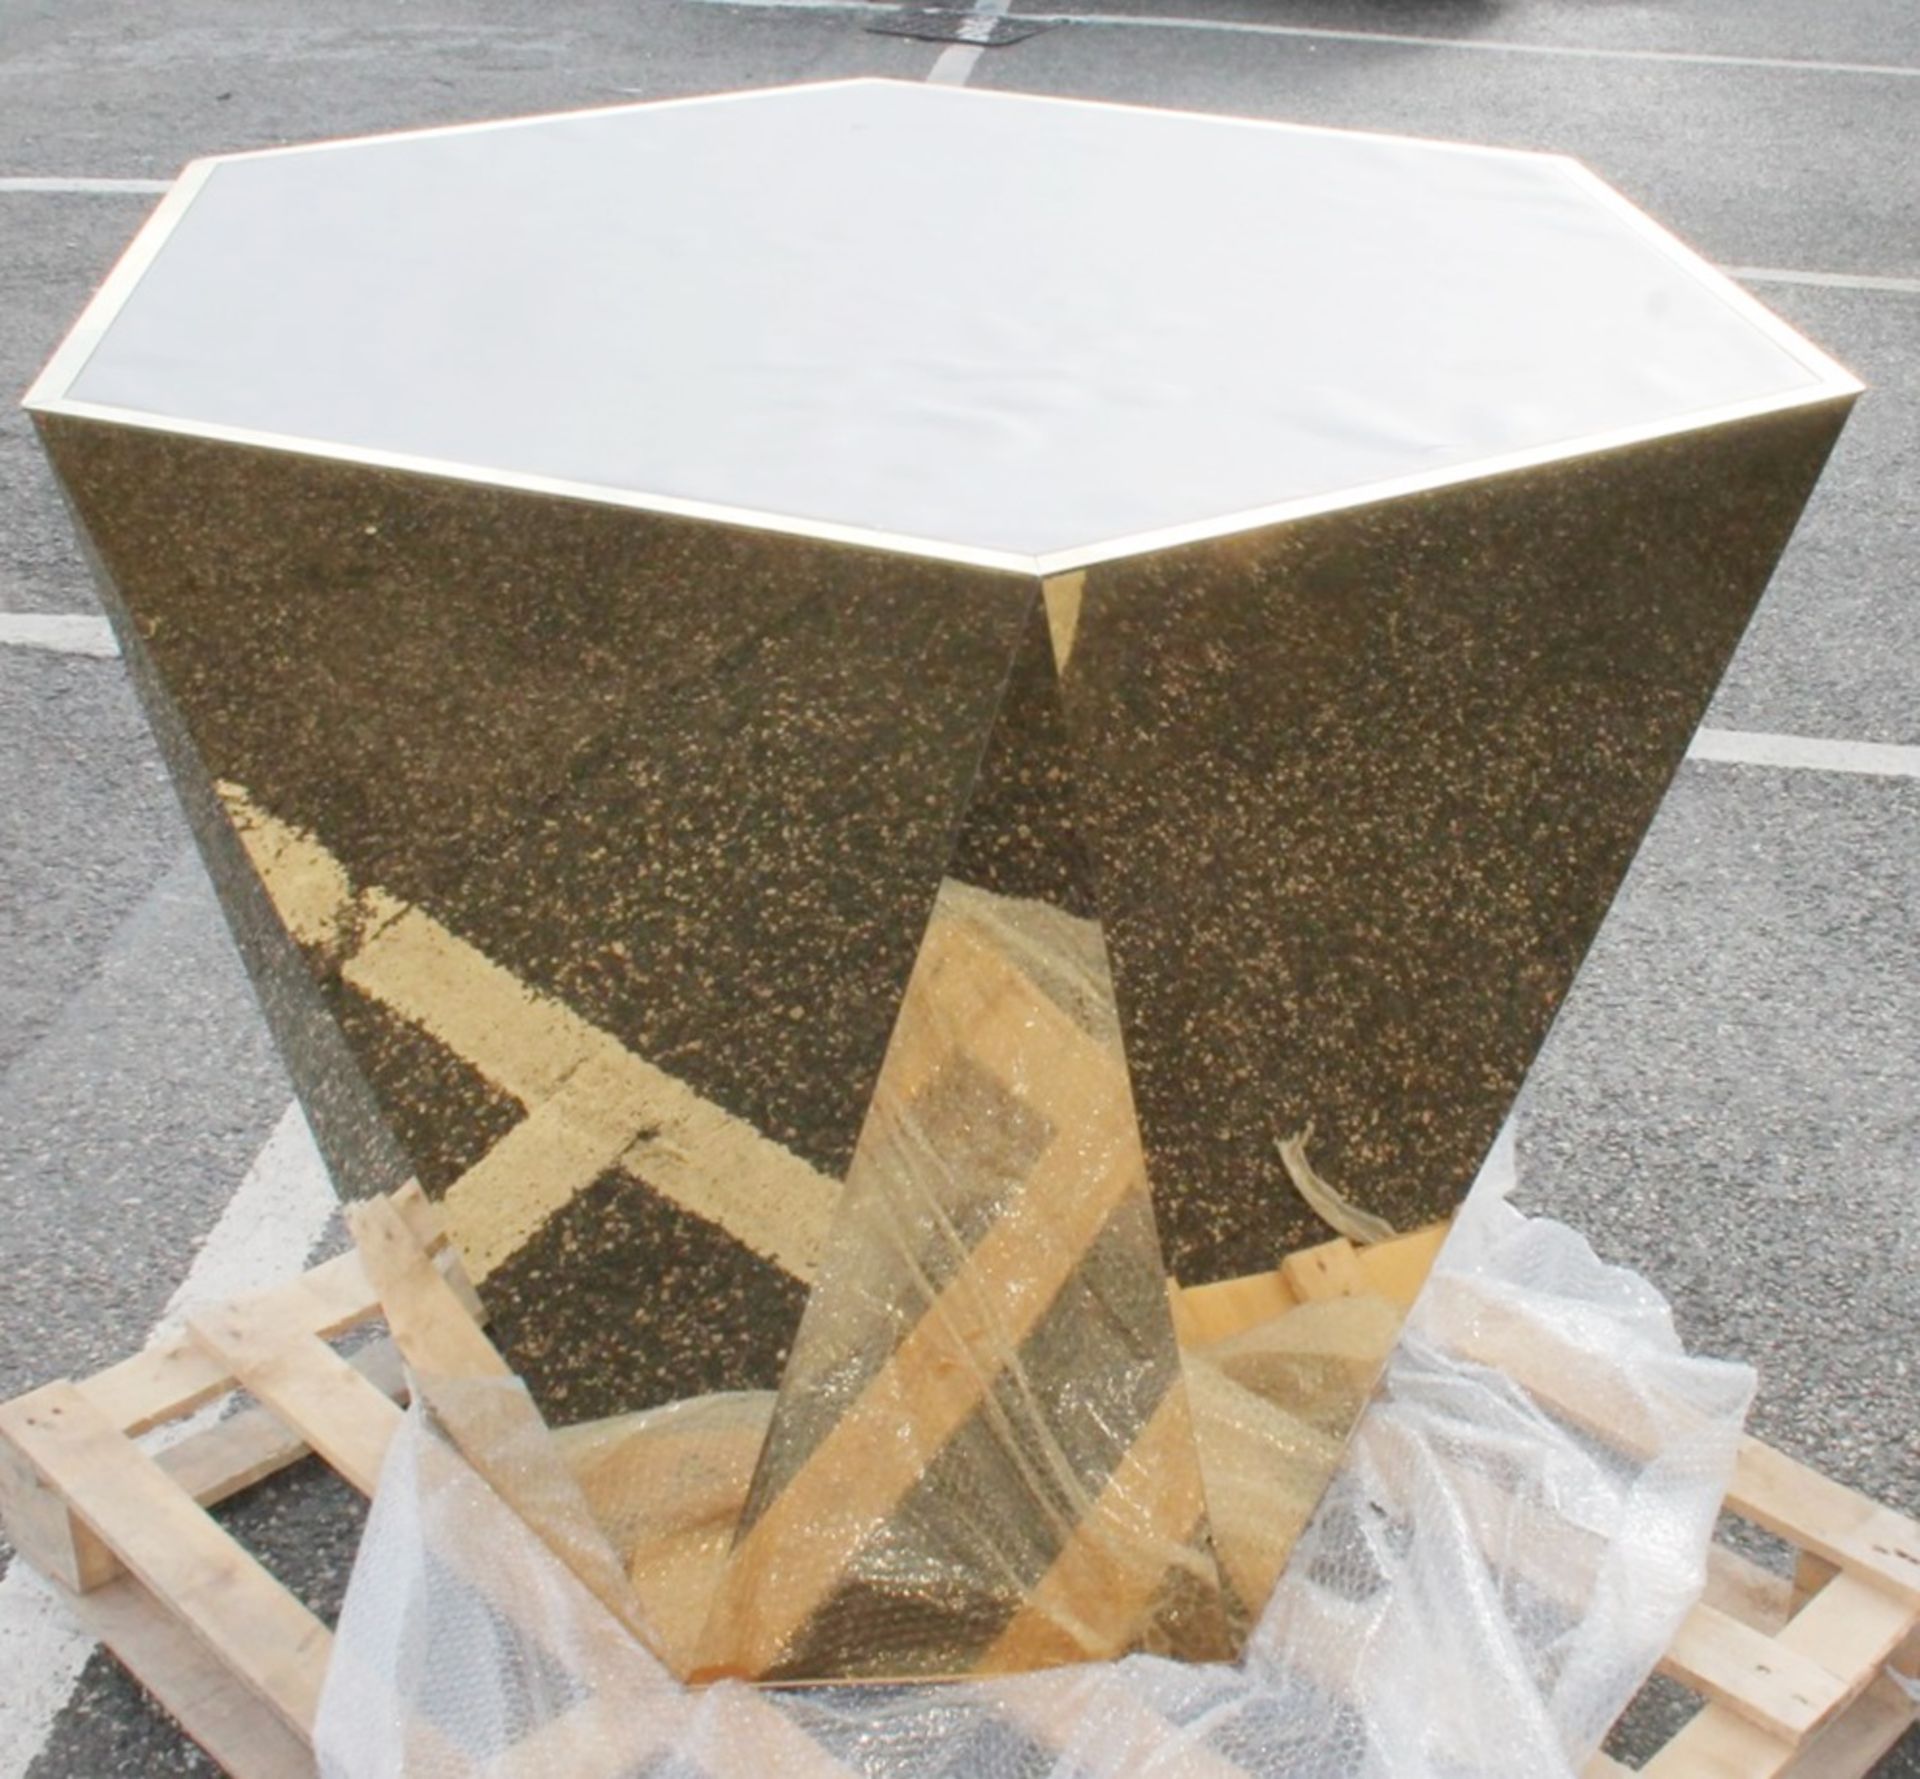 1 x Impressive Hexegon Wrapping Station / Shop Counter Fixture In Gold - Recently Removed From A - Image 5 of 5